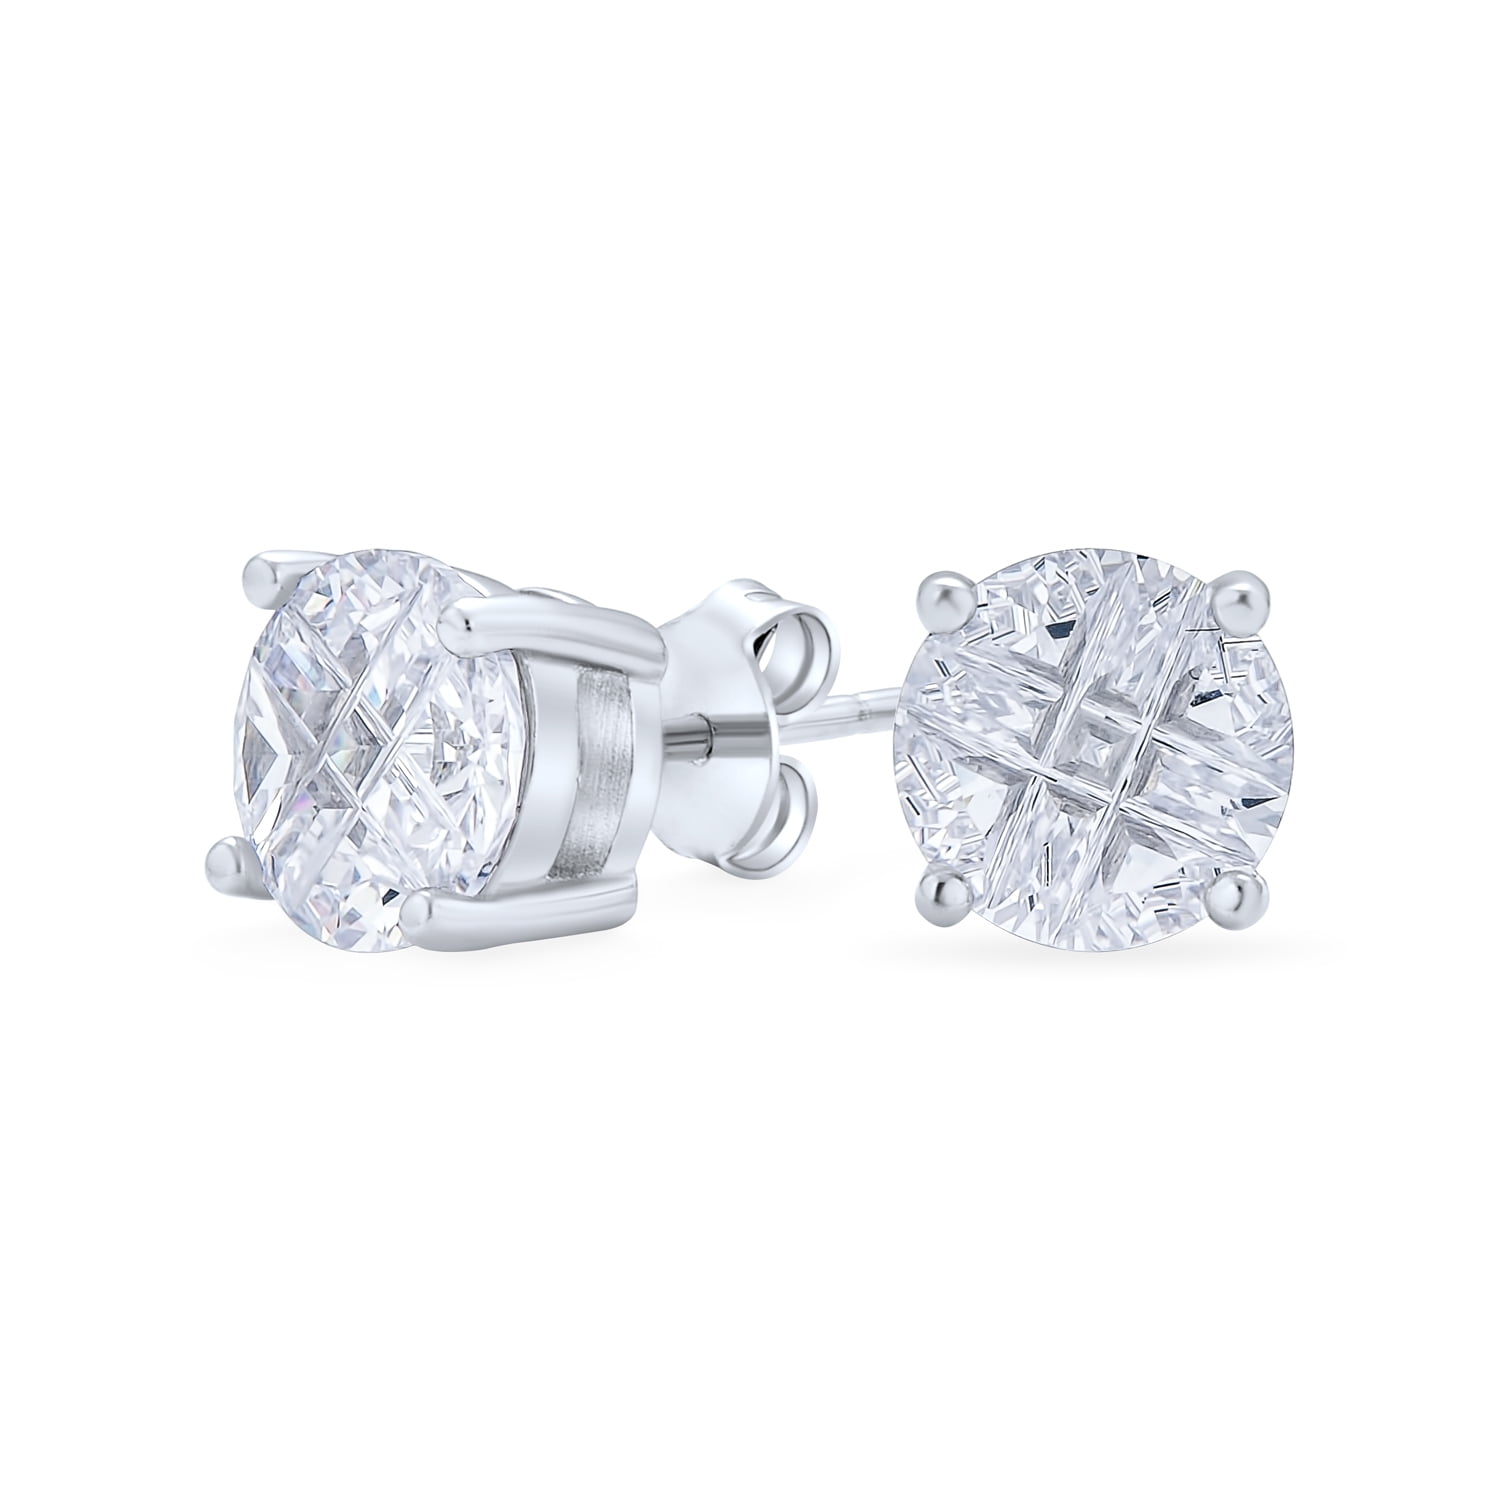 Be You Elegant Cubic Zirconia Designer Look 92.5 Sterling Silver Three Stone Stud for Women